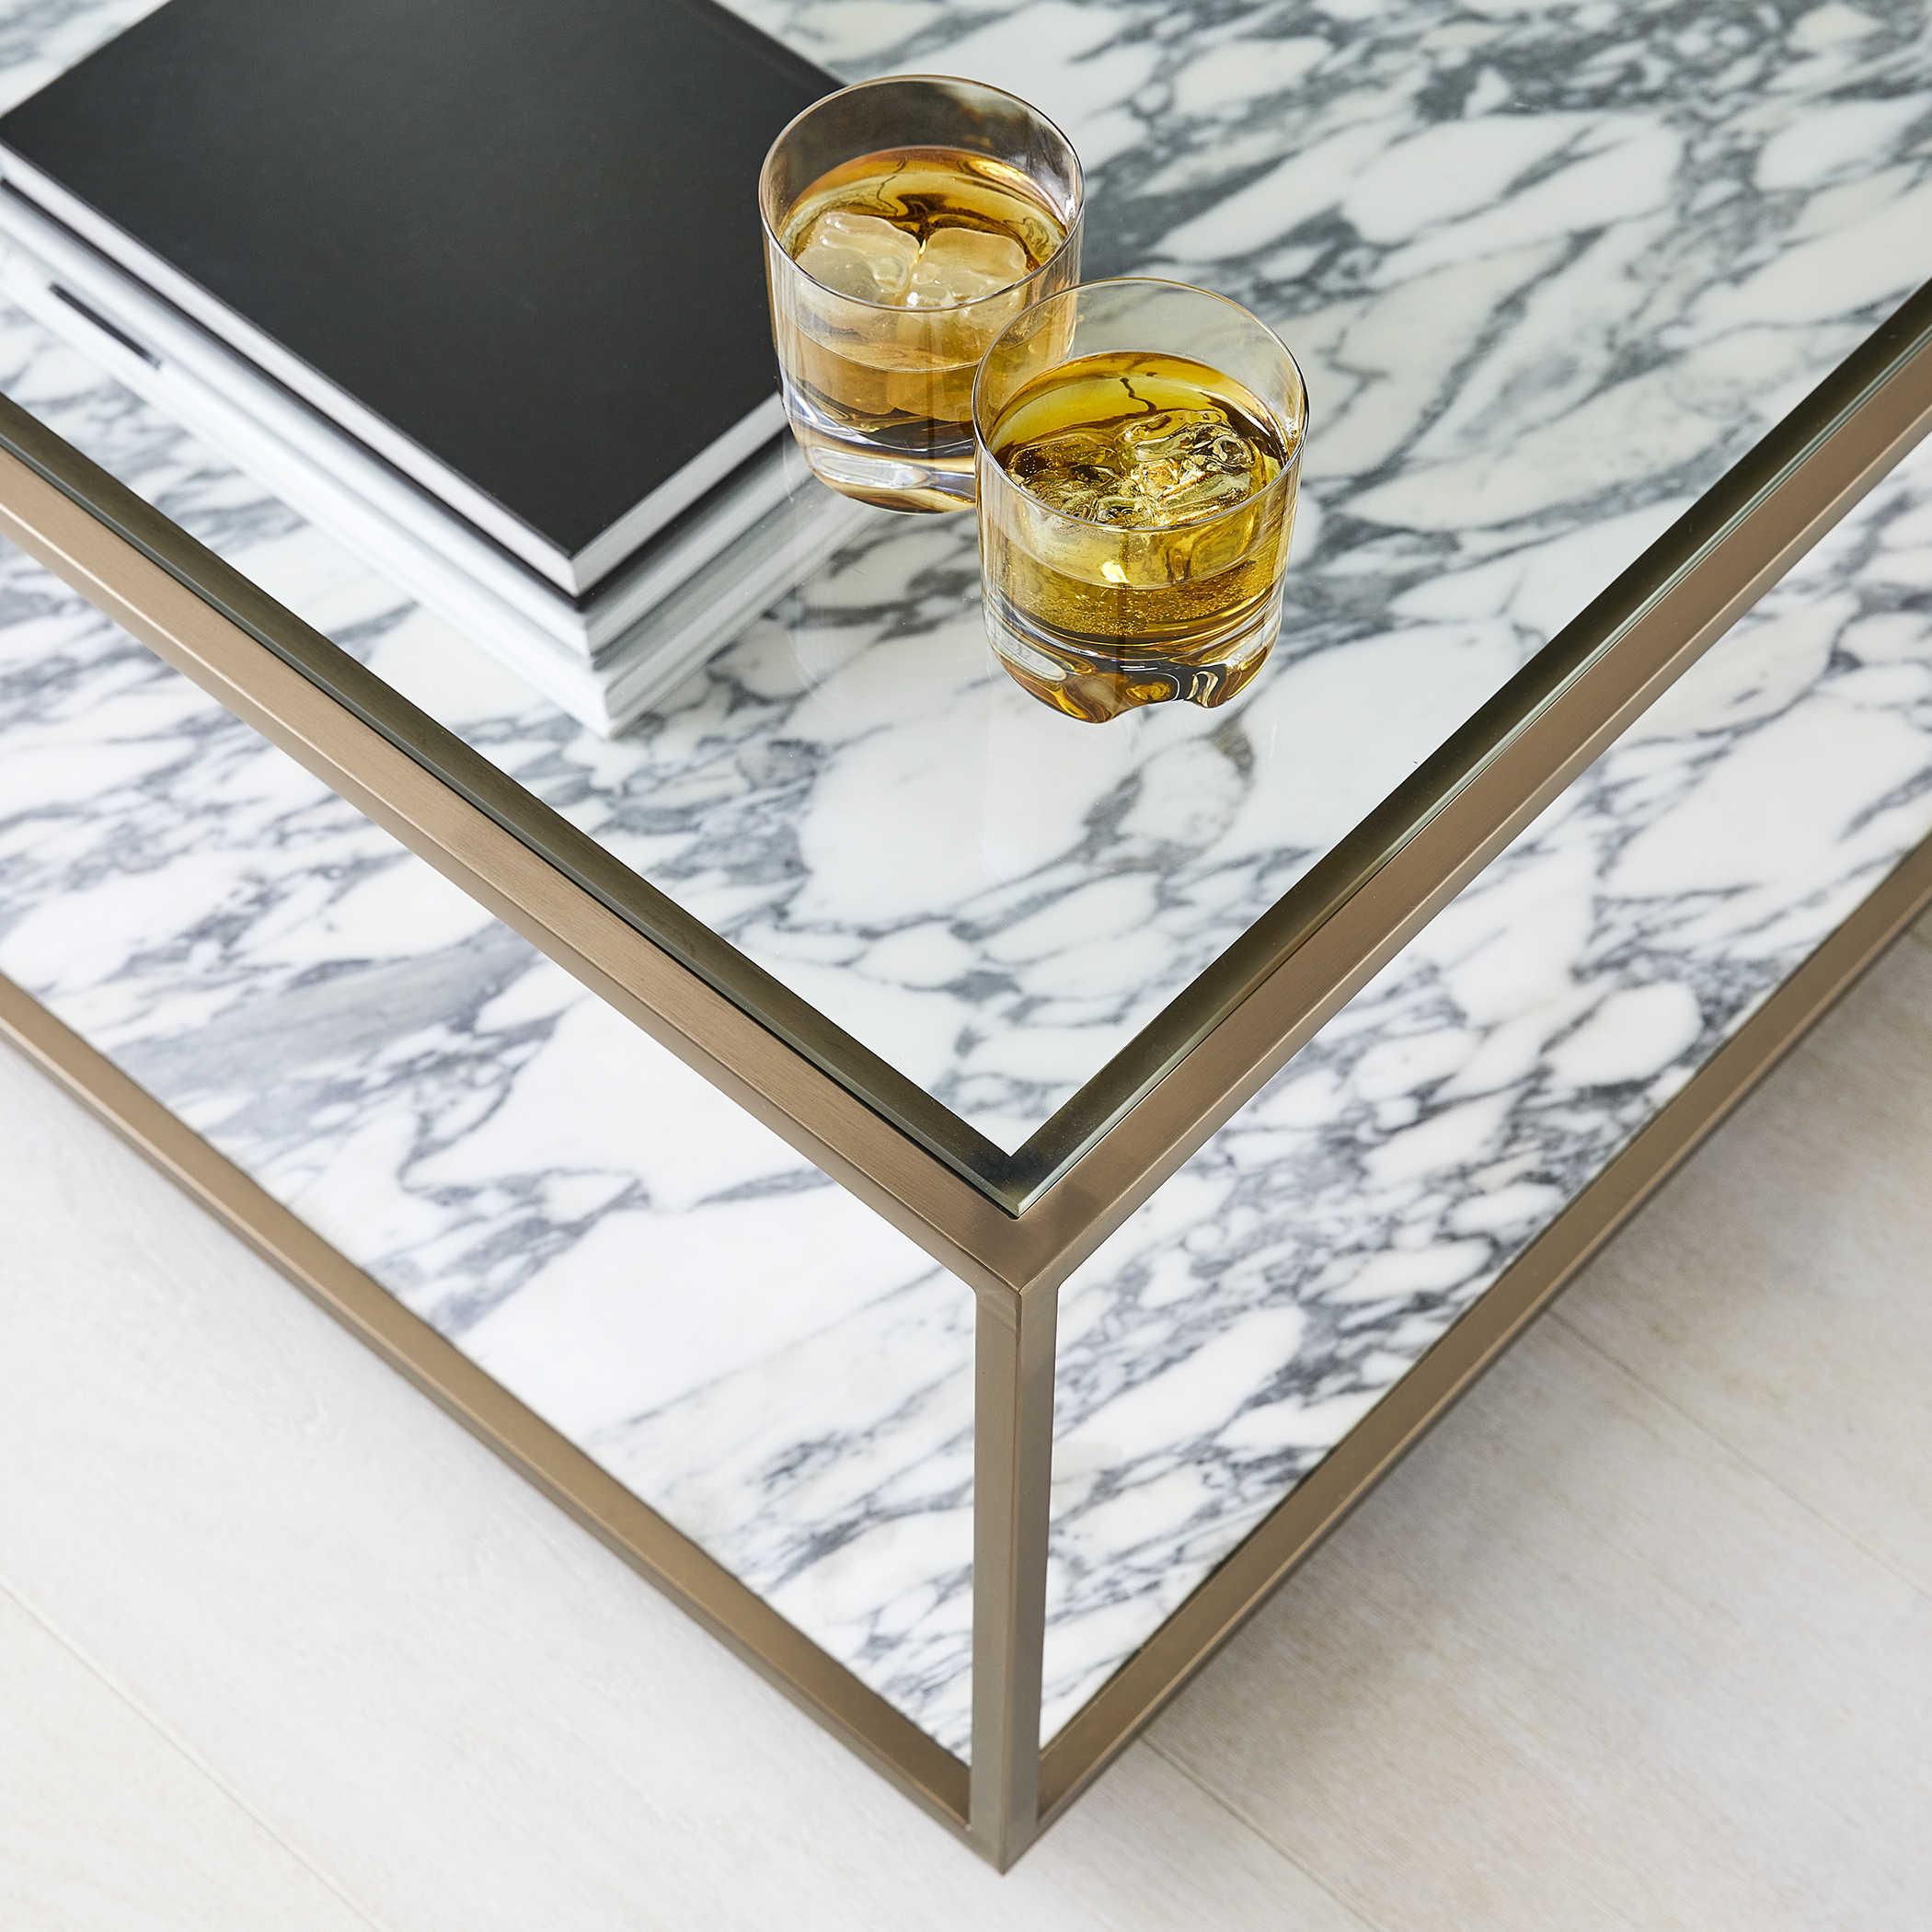 Black Label Floating Plane Coffee Table - Marble/Brass